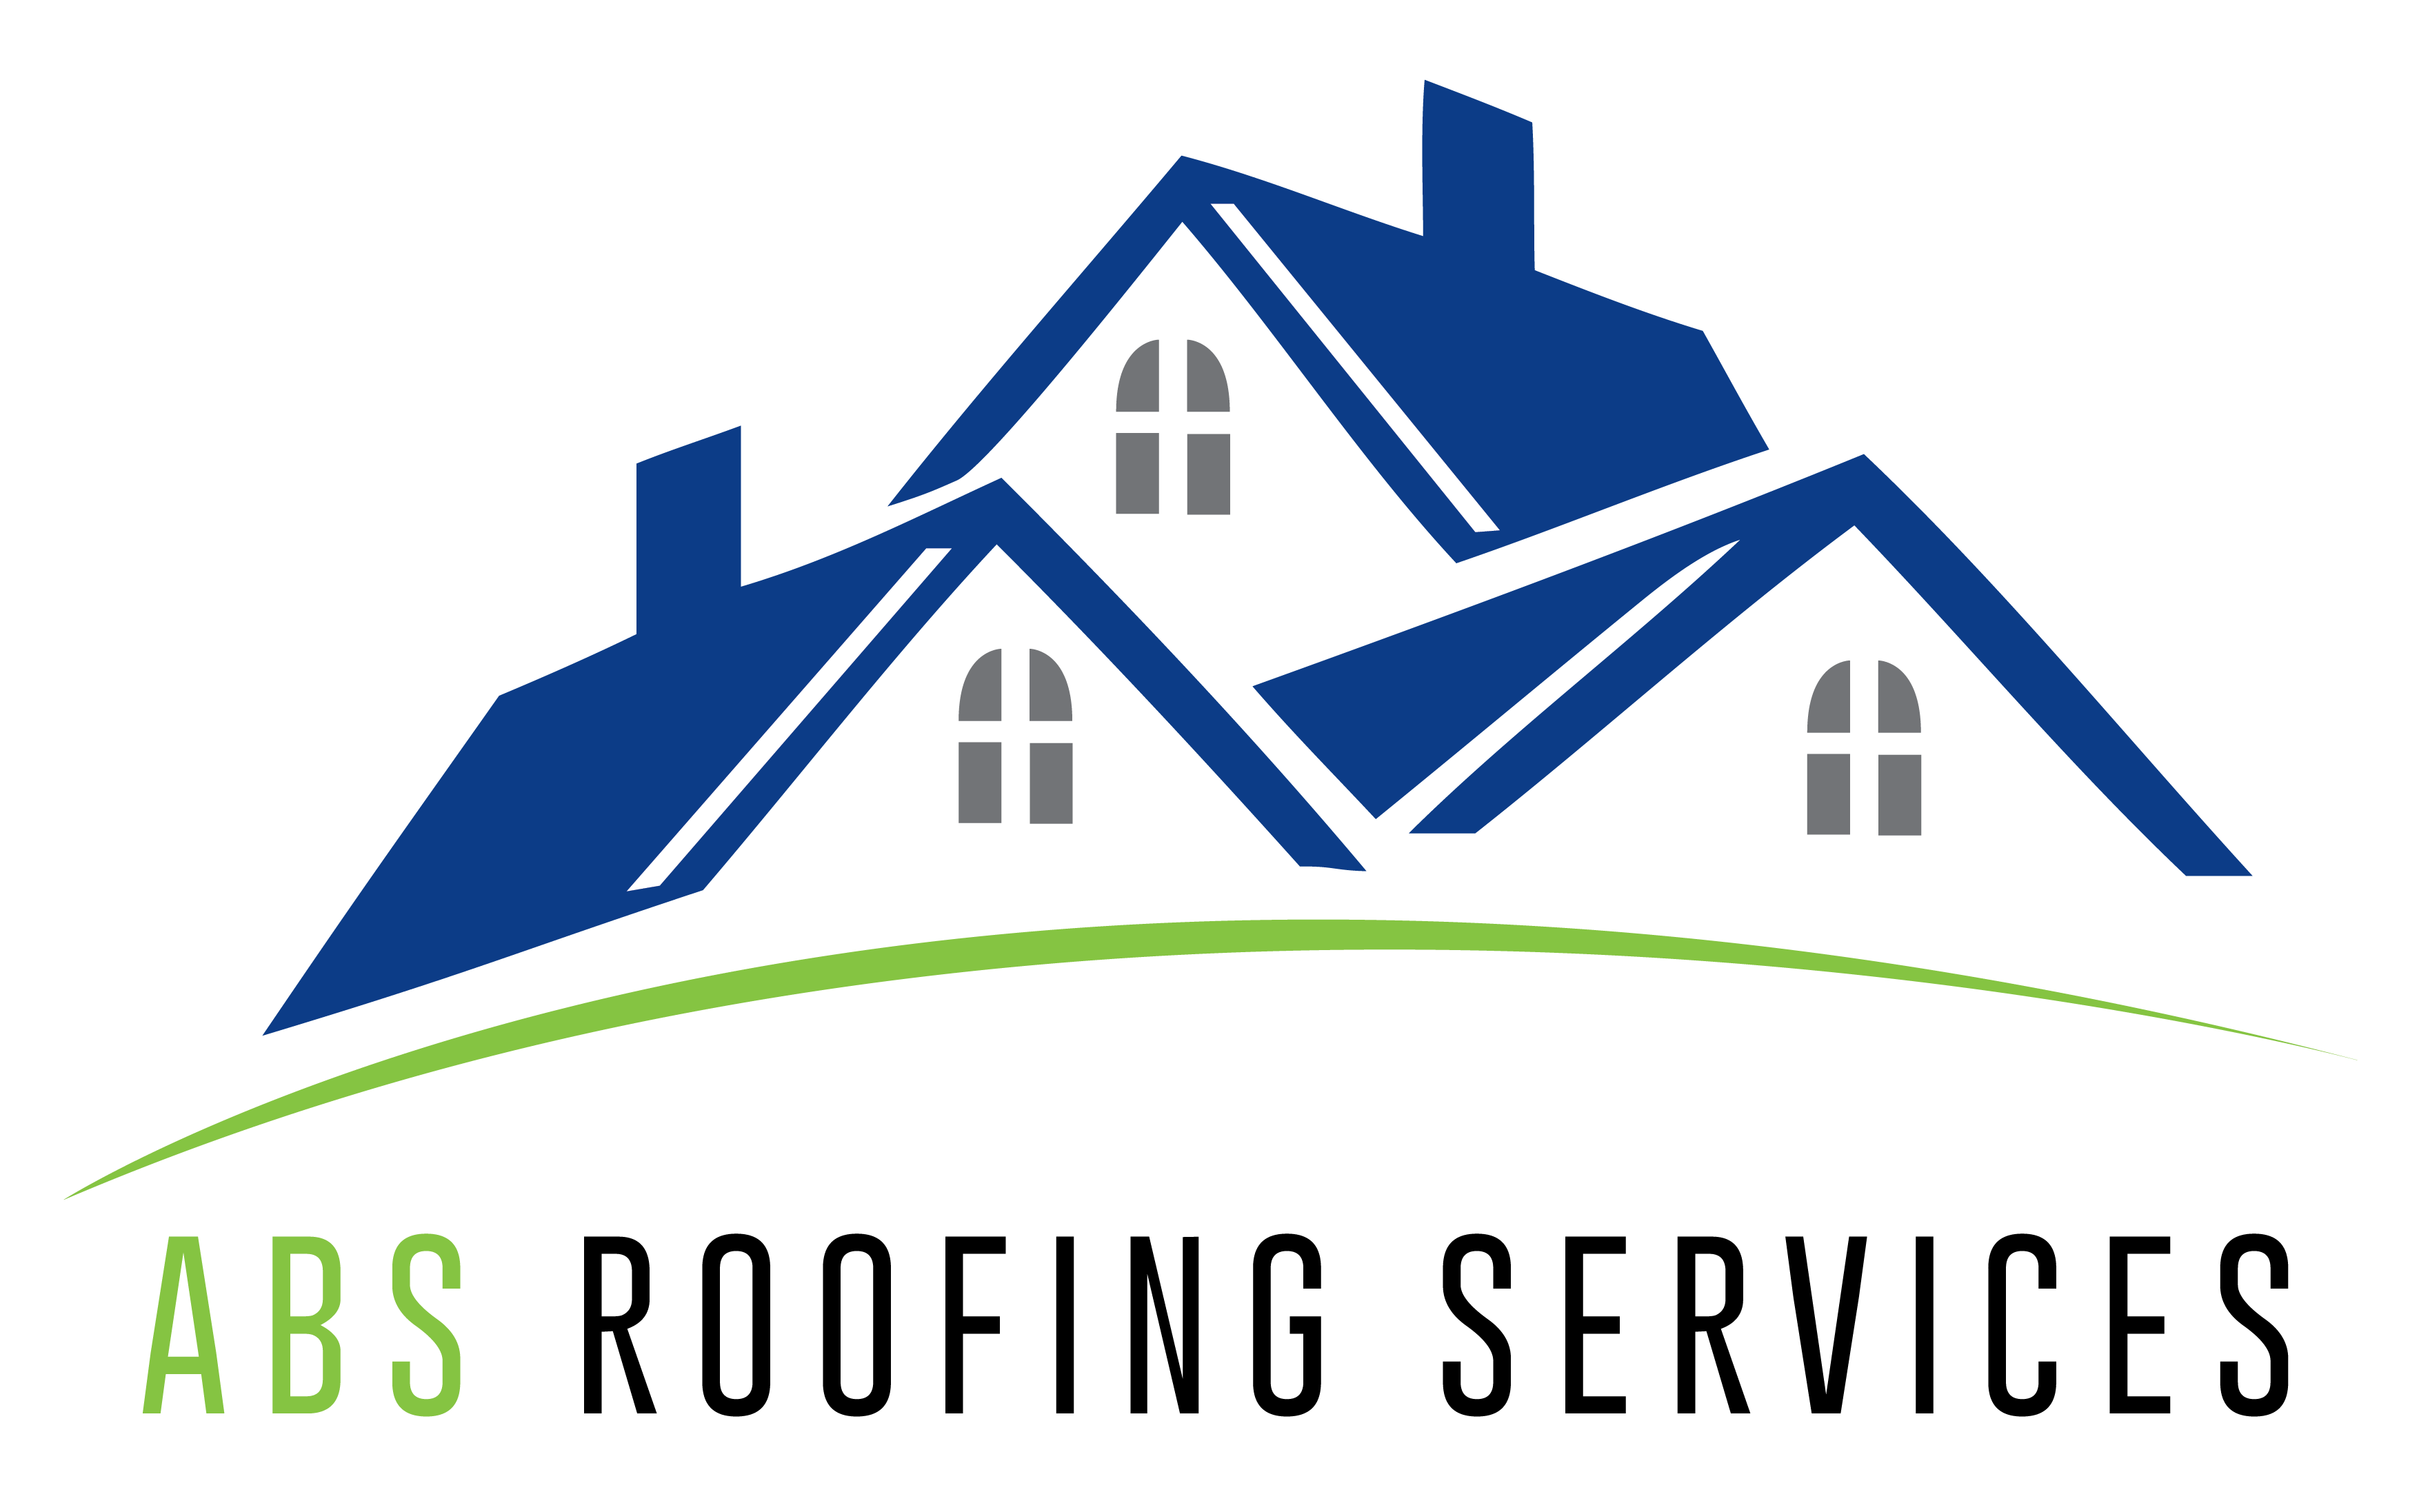 Home Roof Logo - Sydney Roof Repairs, Roofing Maintenance, Re Roofing Sydney, New ...